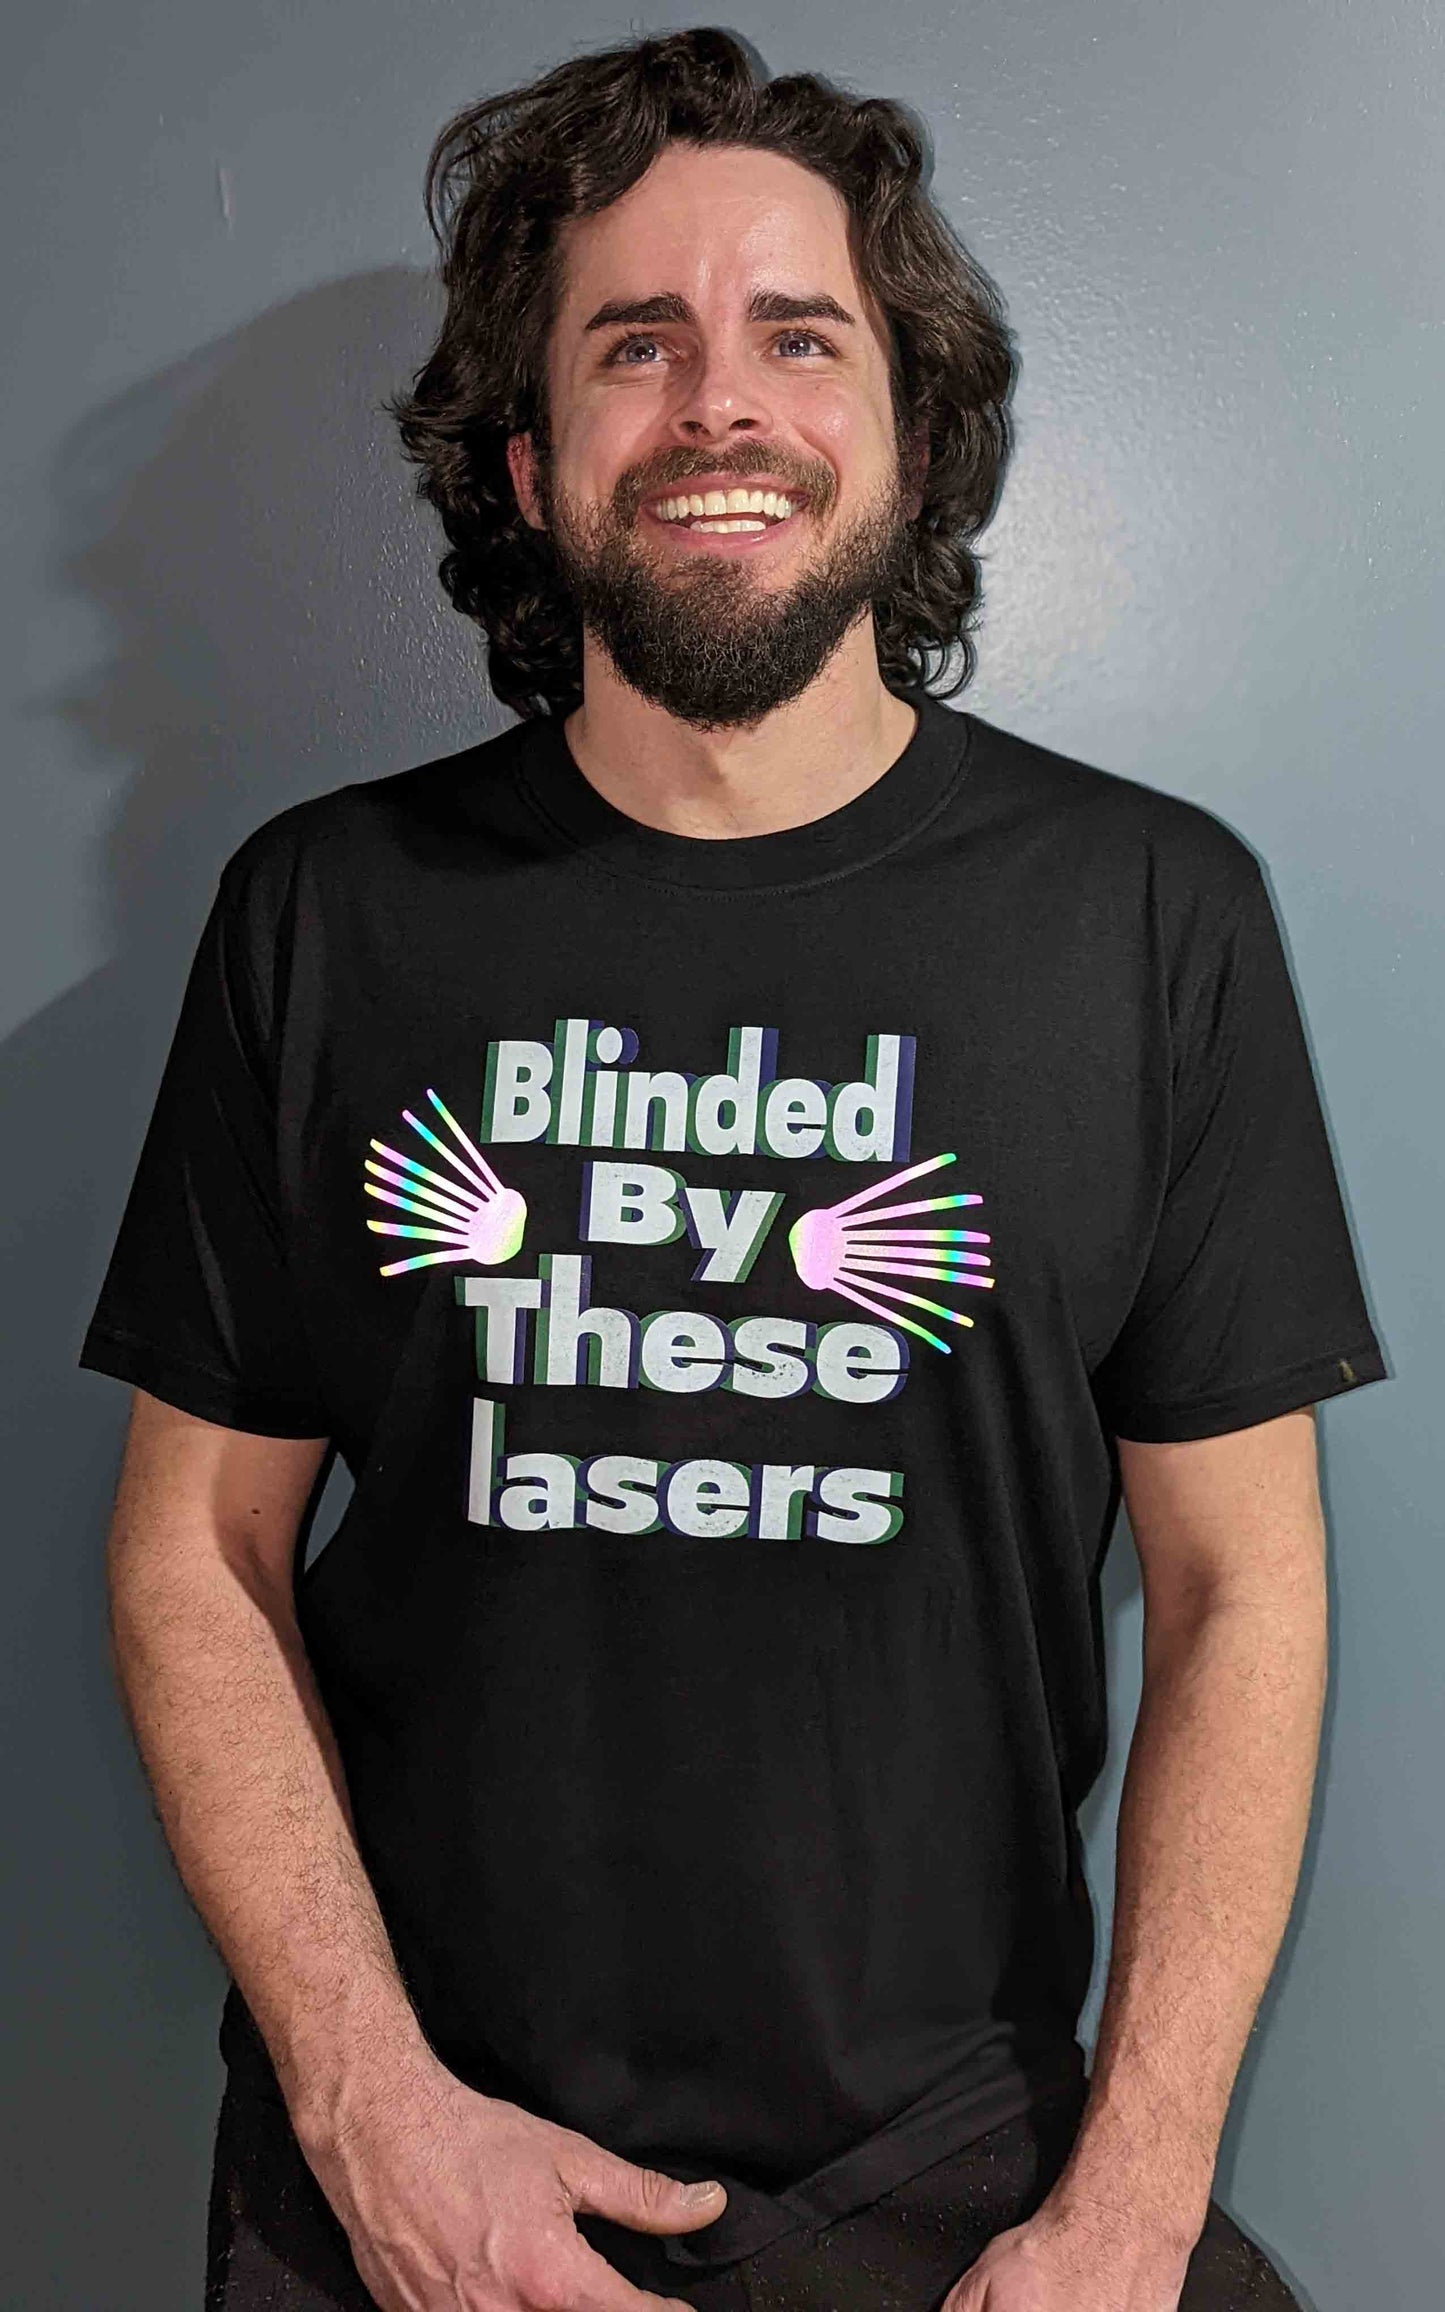 Blinded by these lasers